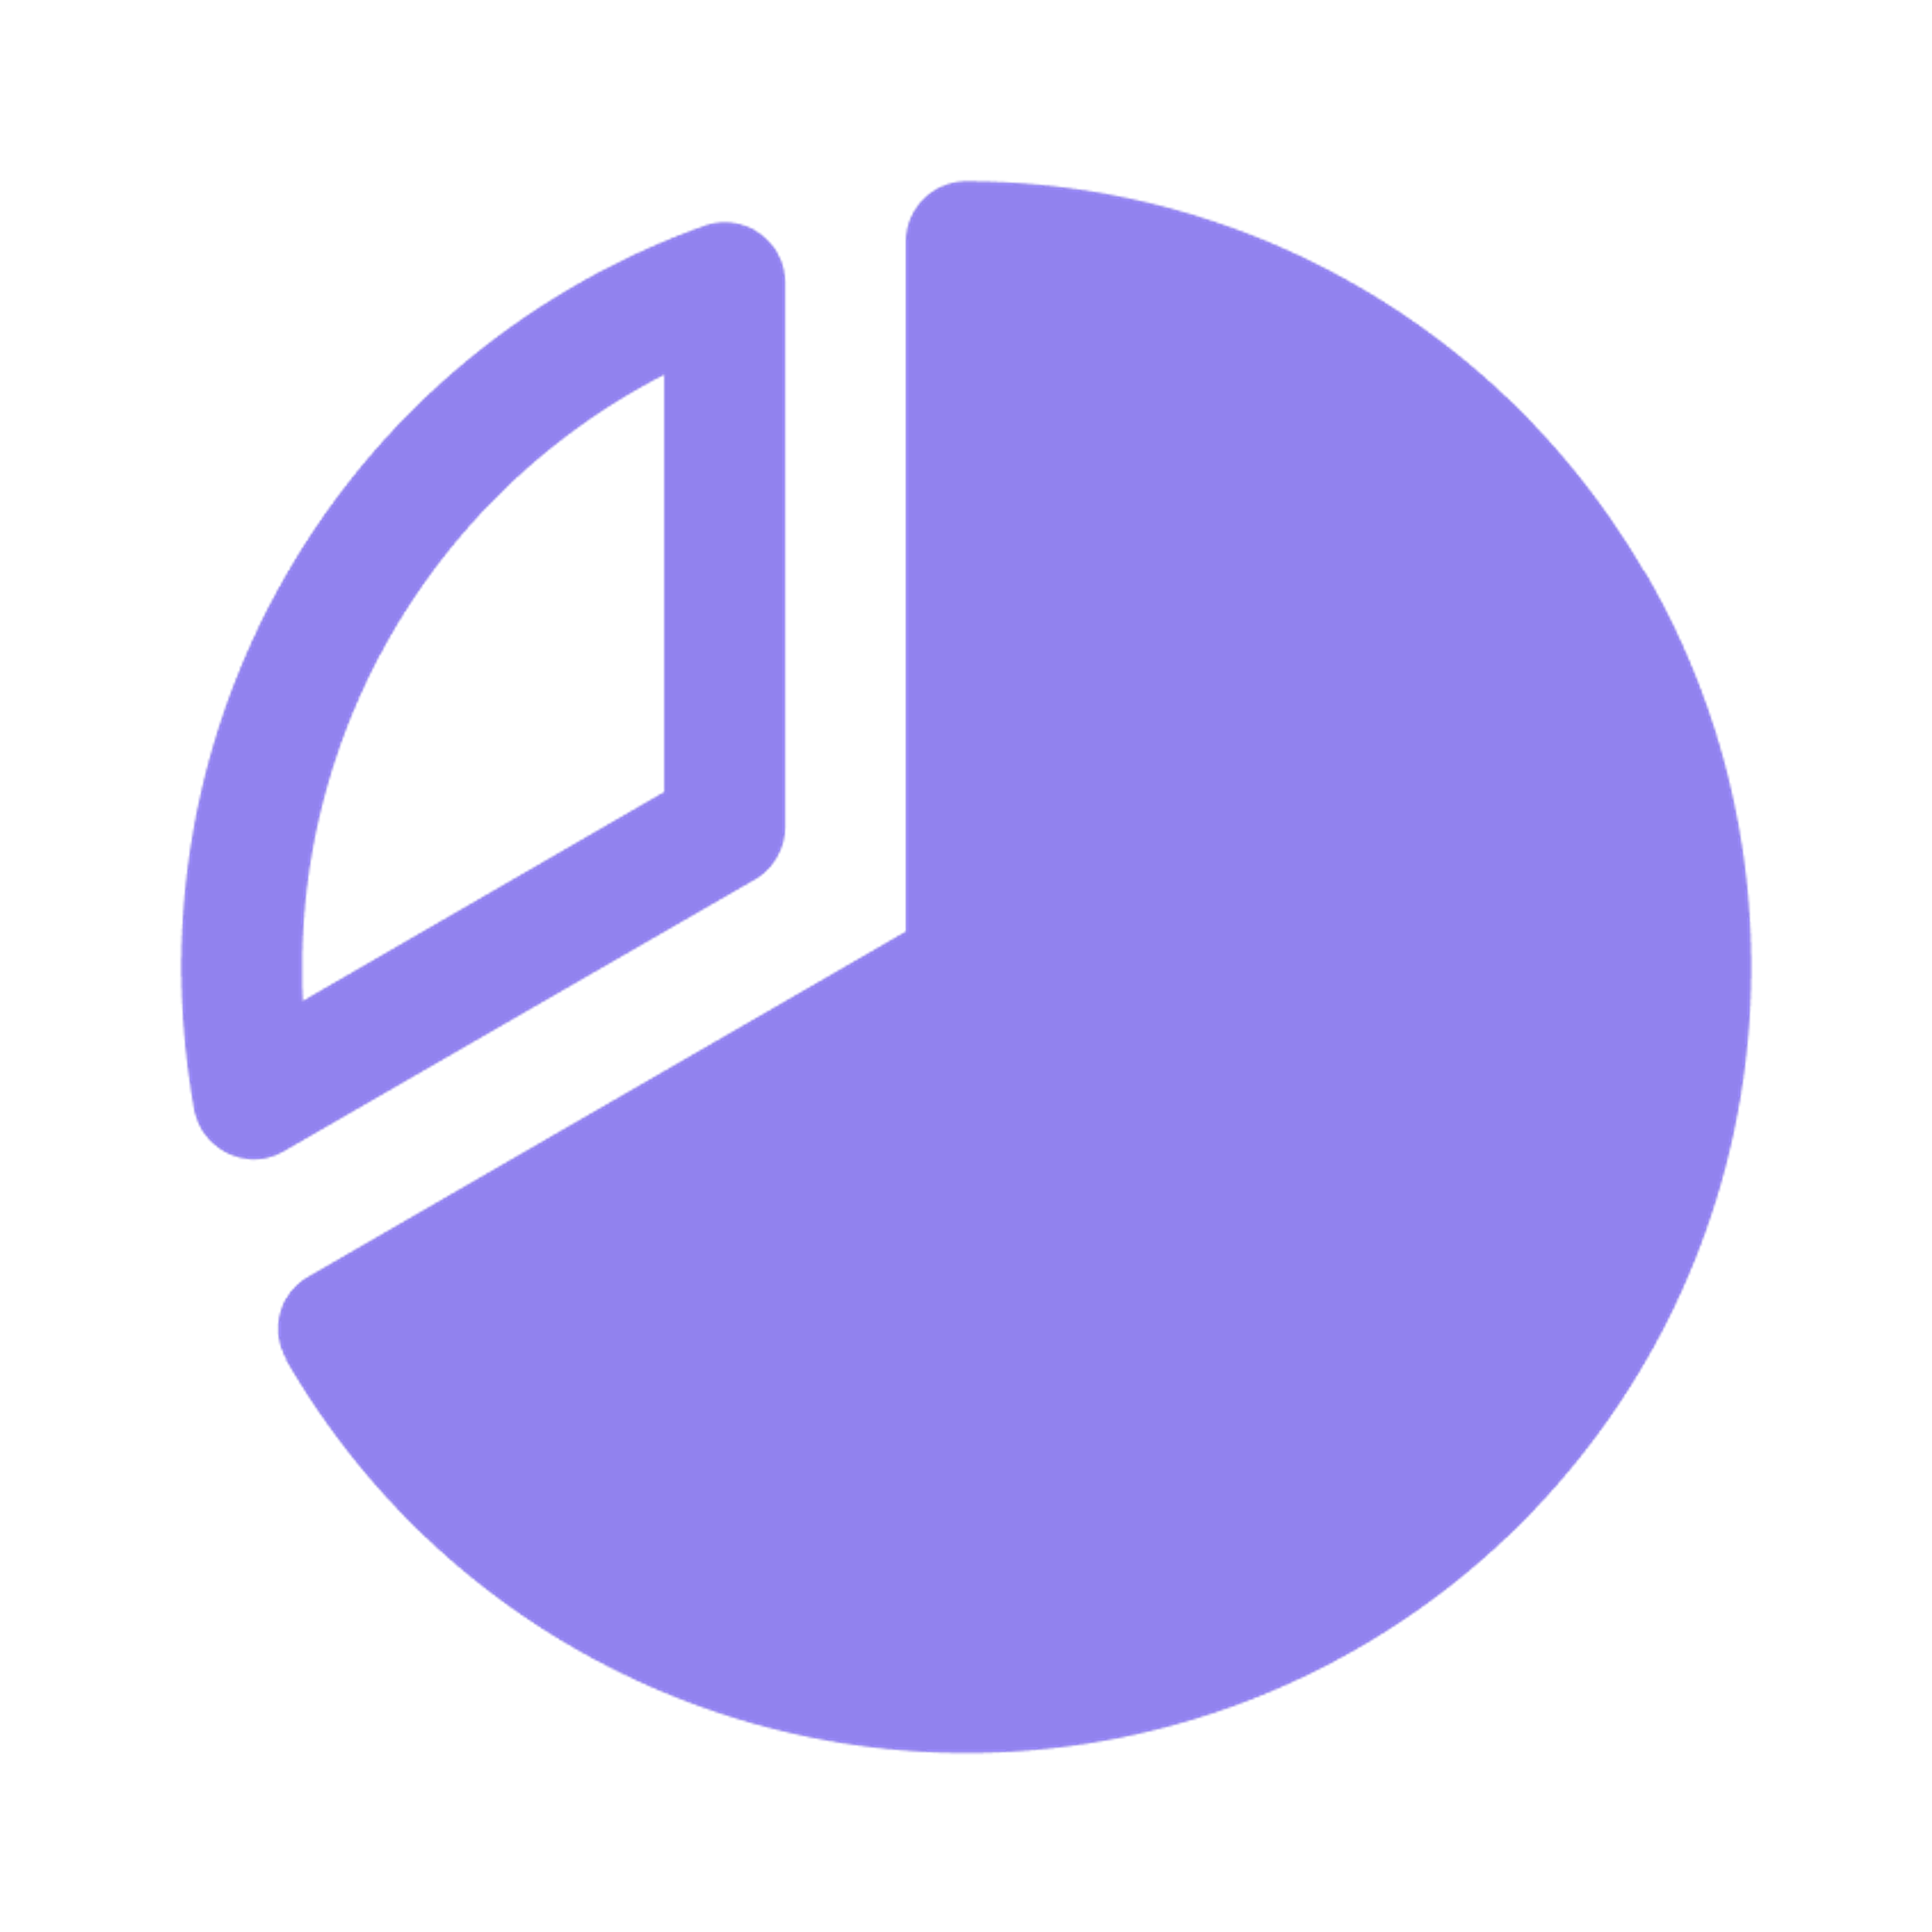 A purple icon of a pie chart on a transparent background